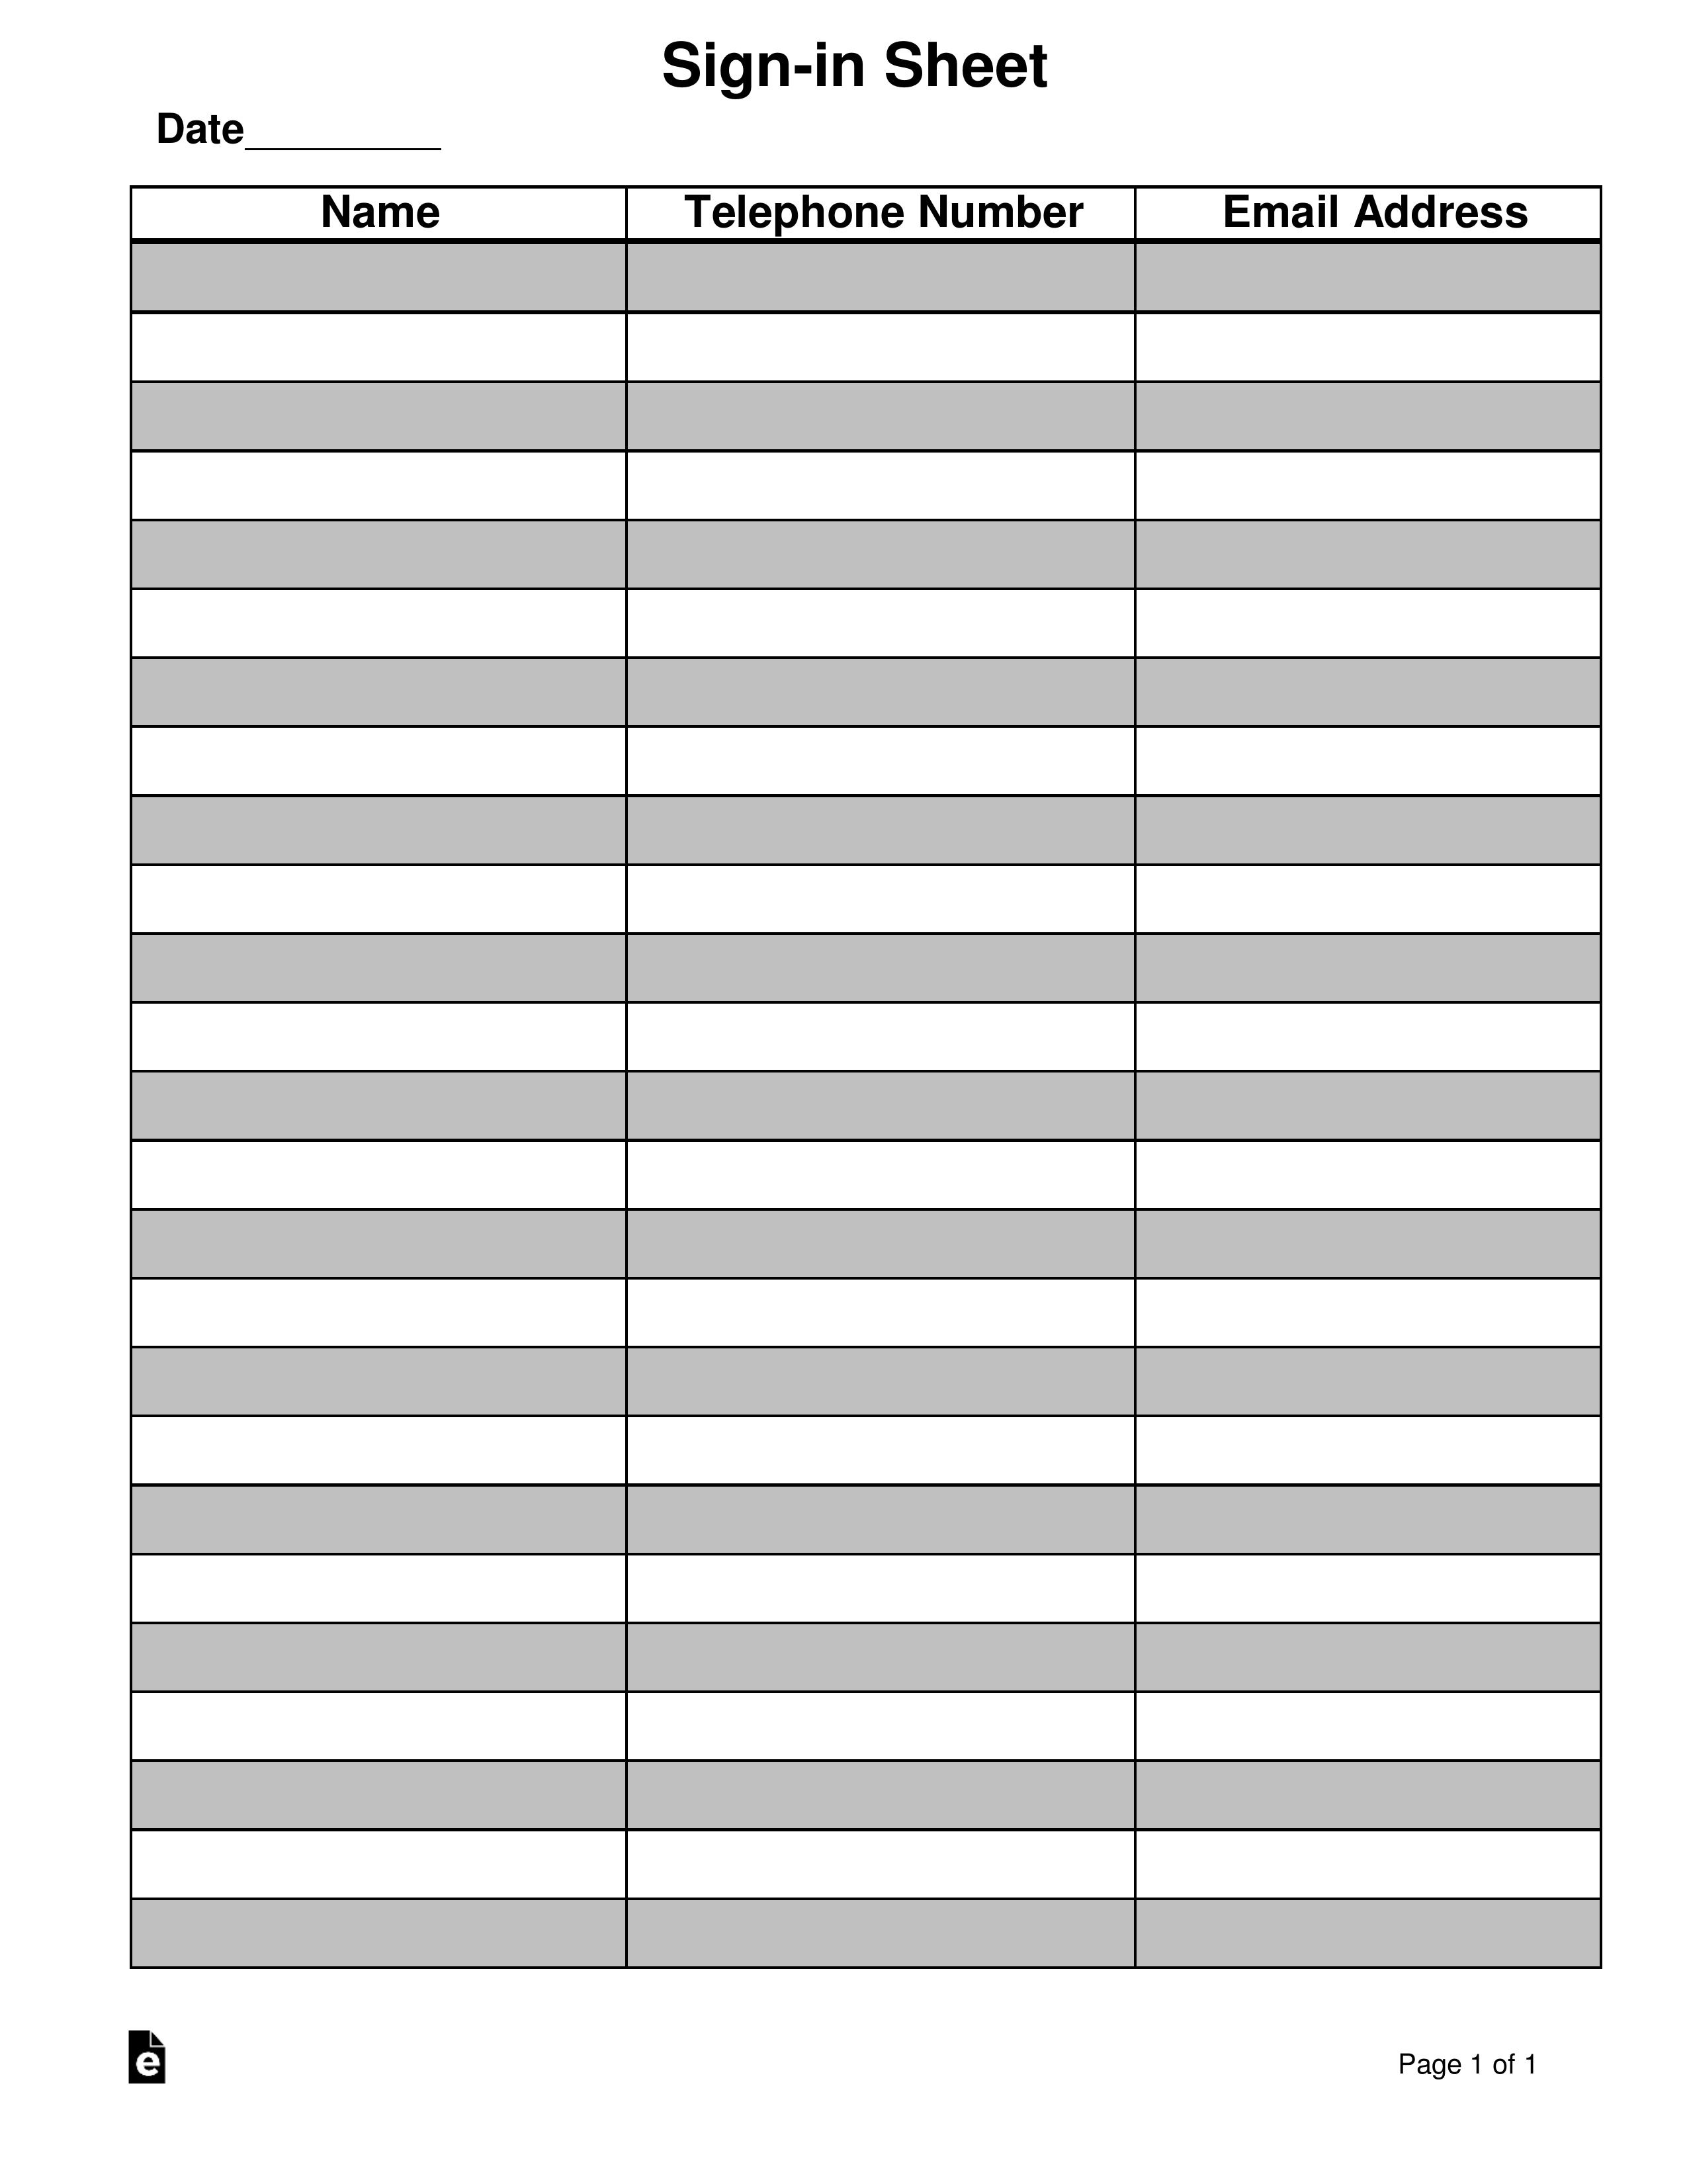 Attendance Guest Sign in Sheet Template EForms